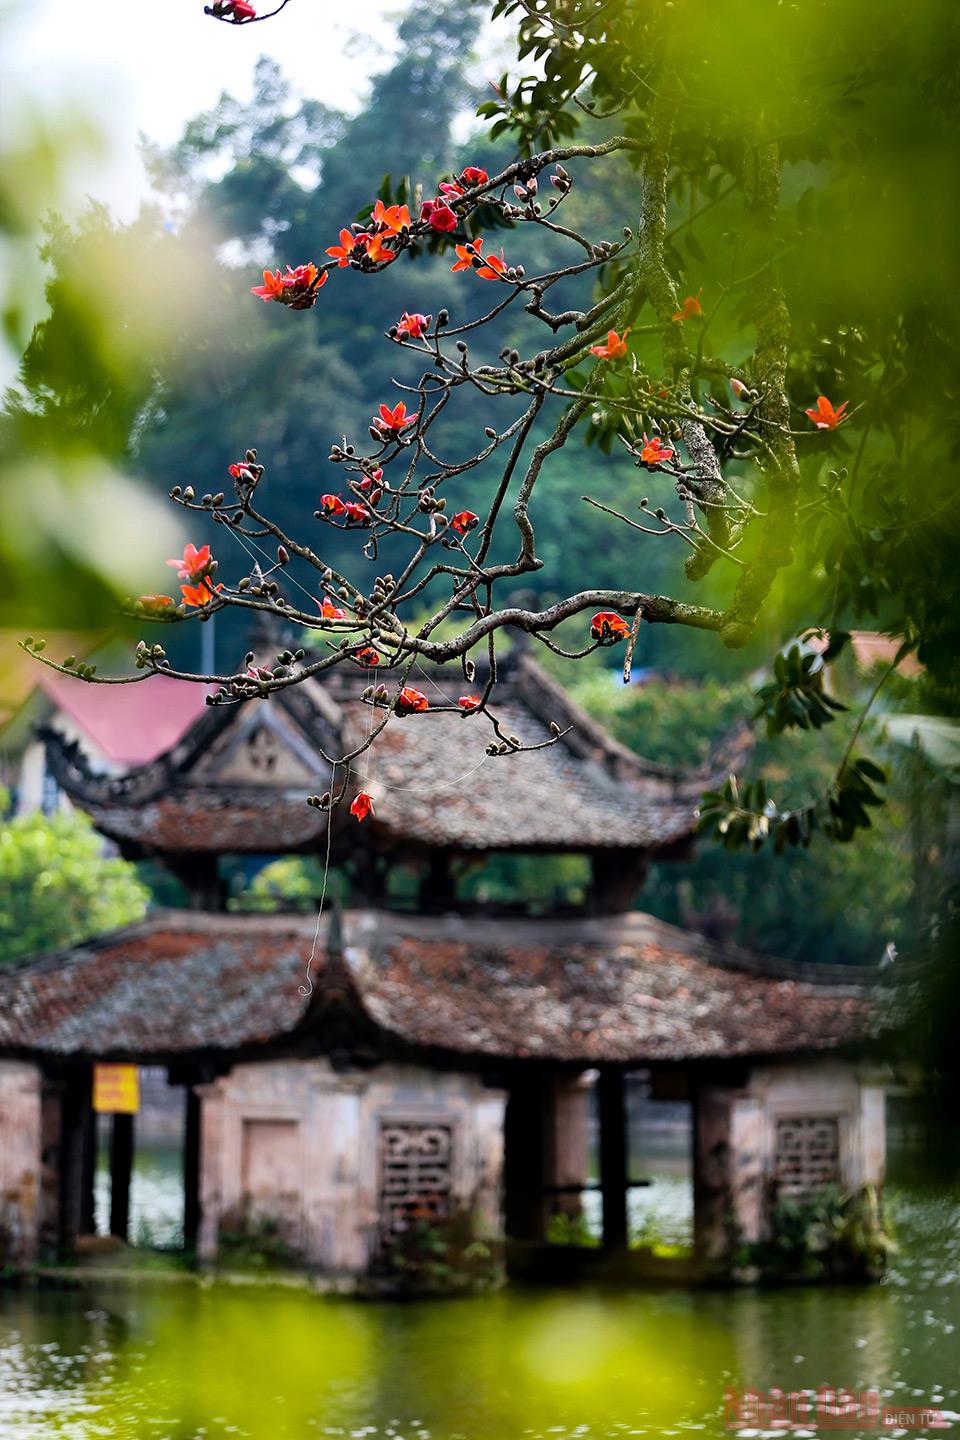 Buddhist temple brightened up with red cotton tree flowers